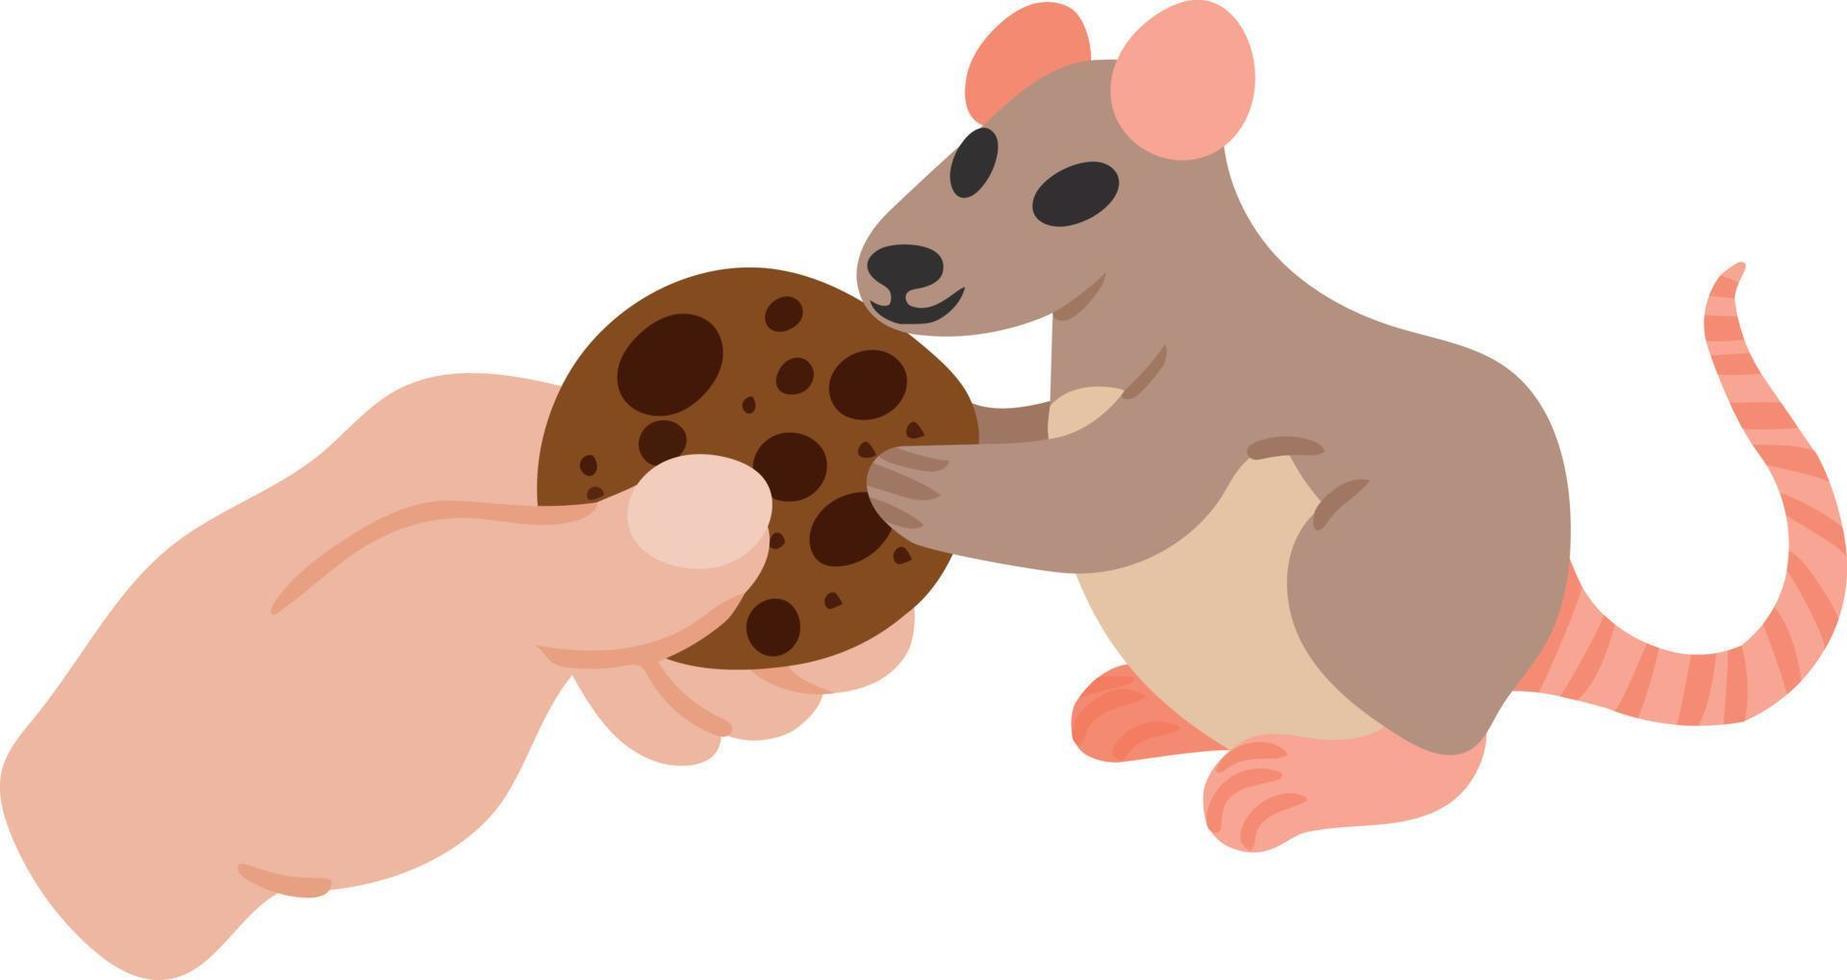 Cute rat takes cookie from person. Concept for design of posters brochures thematic posters. Flat. Vector illustration on white background. Design element